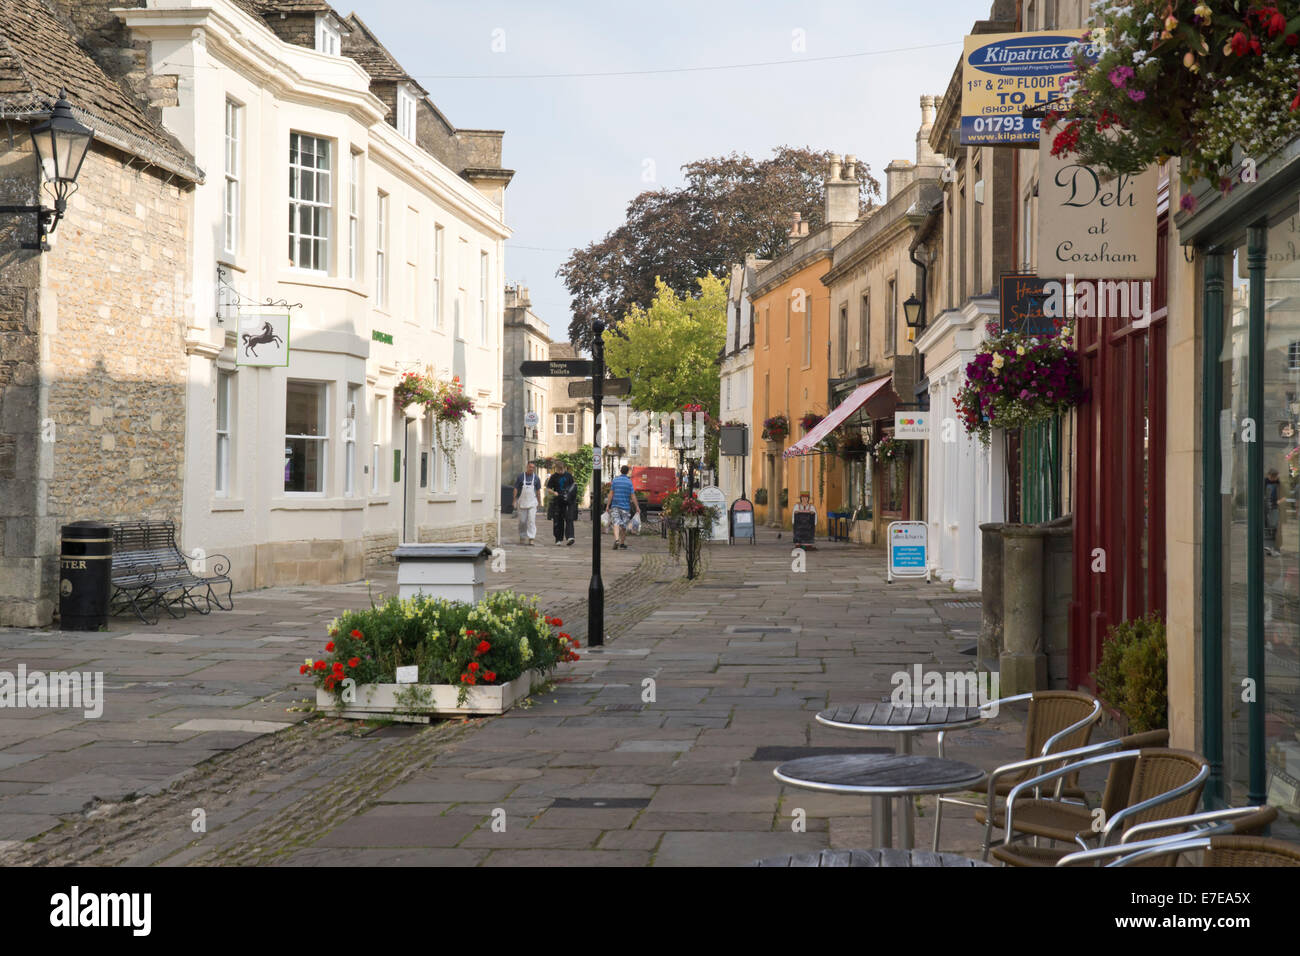 Corsham a small town in Wiltshire England UK. The local  Bath stone is a common building material. High Street Stock Photo